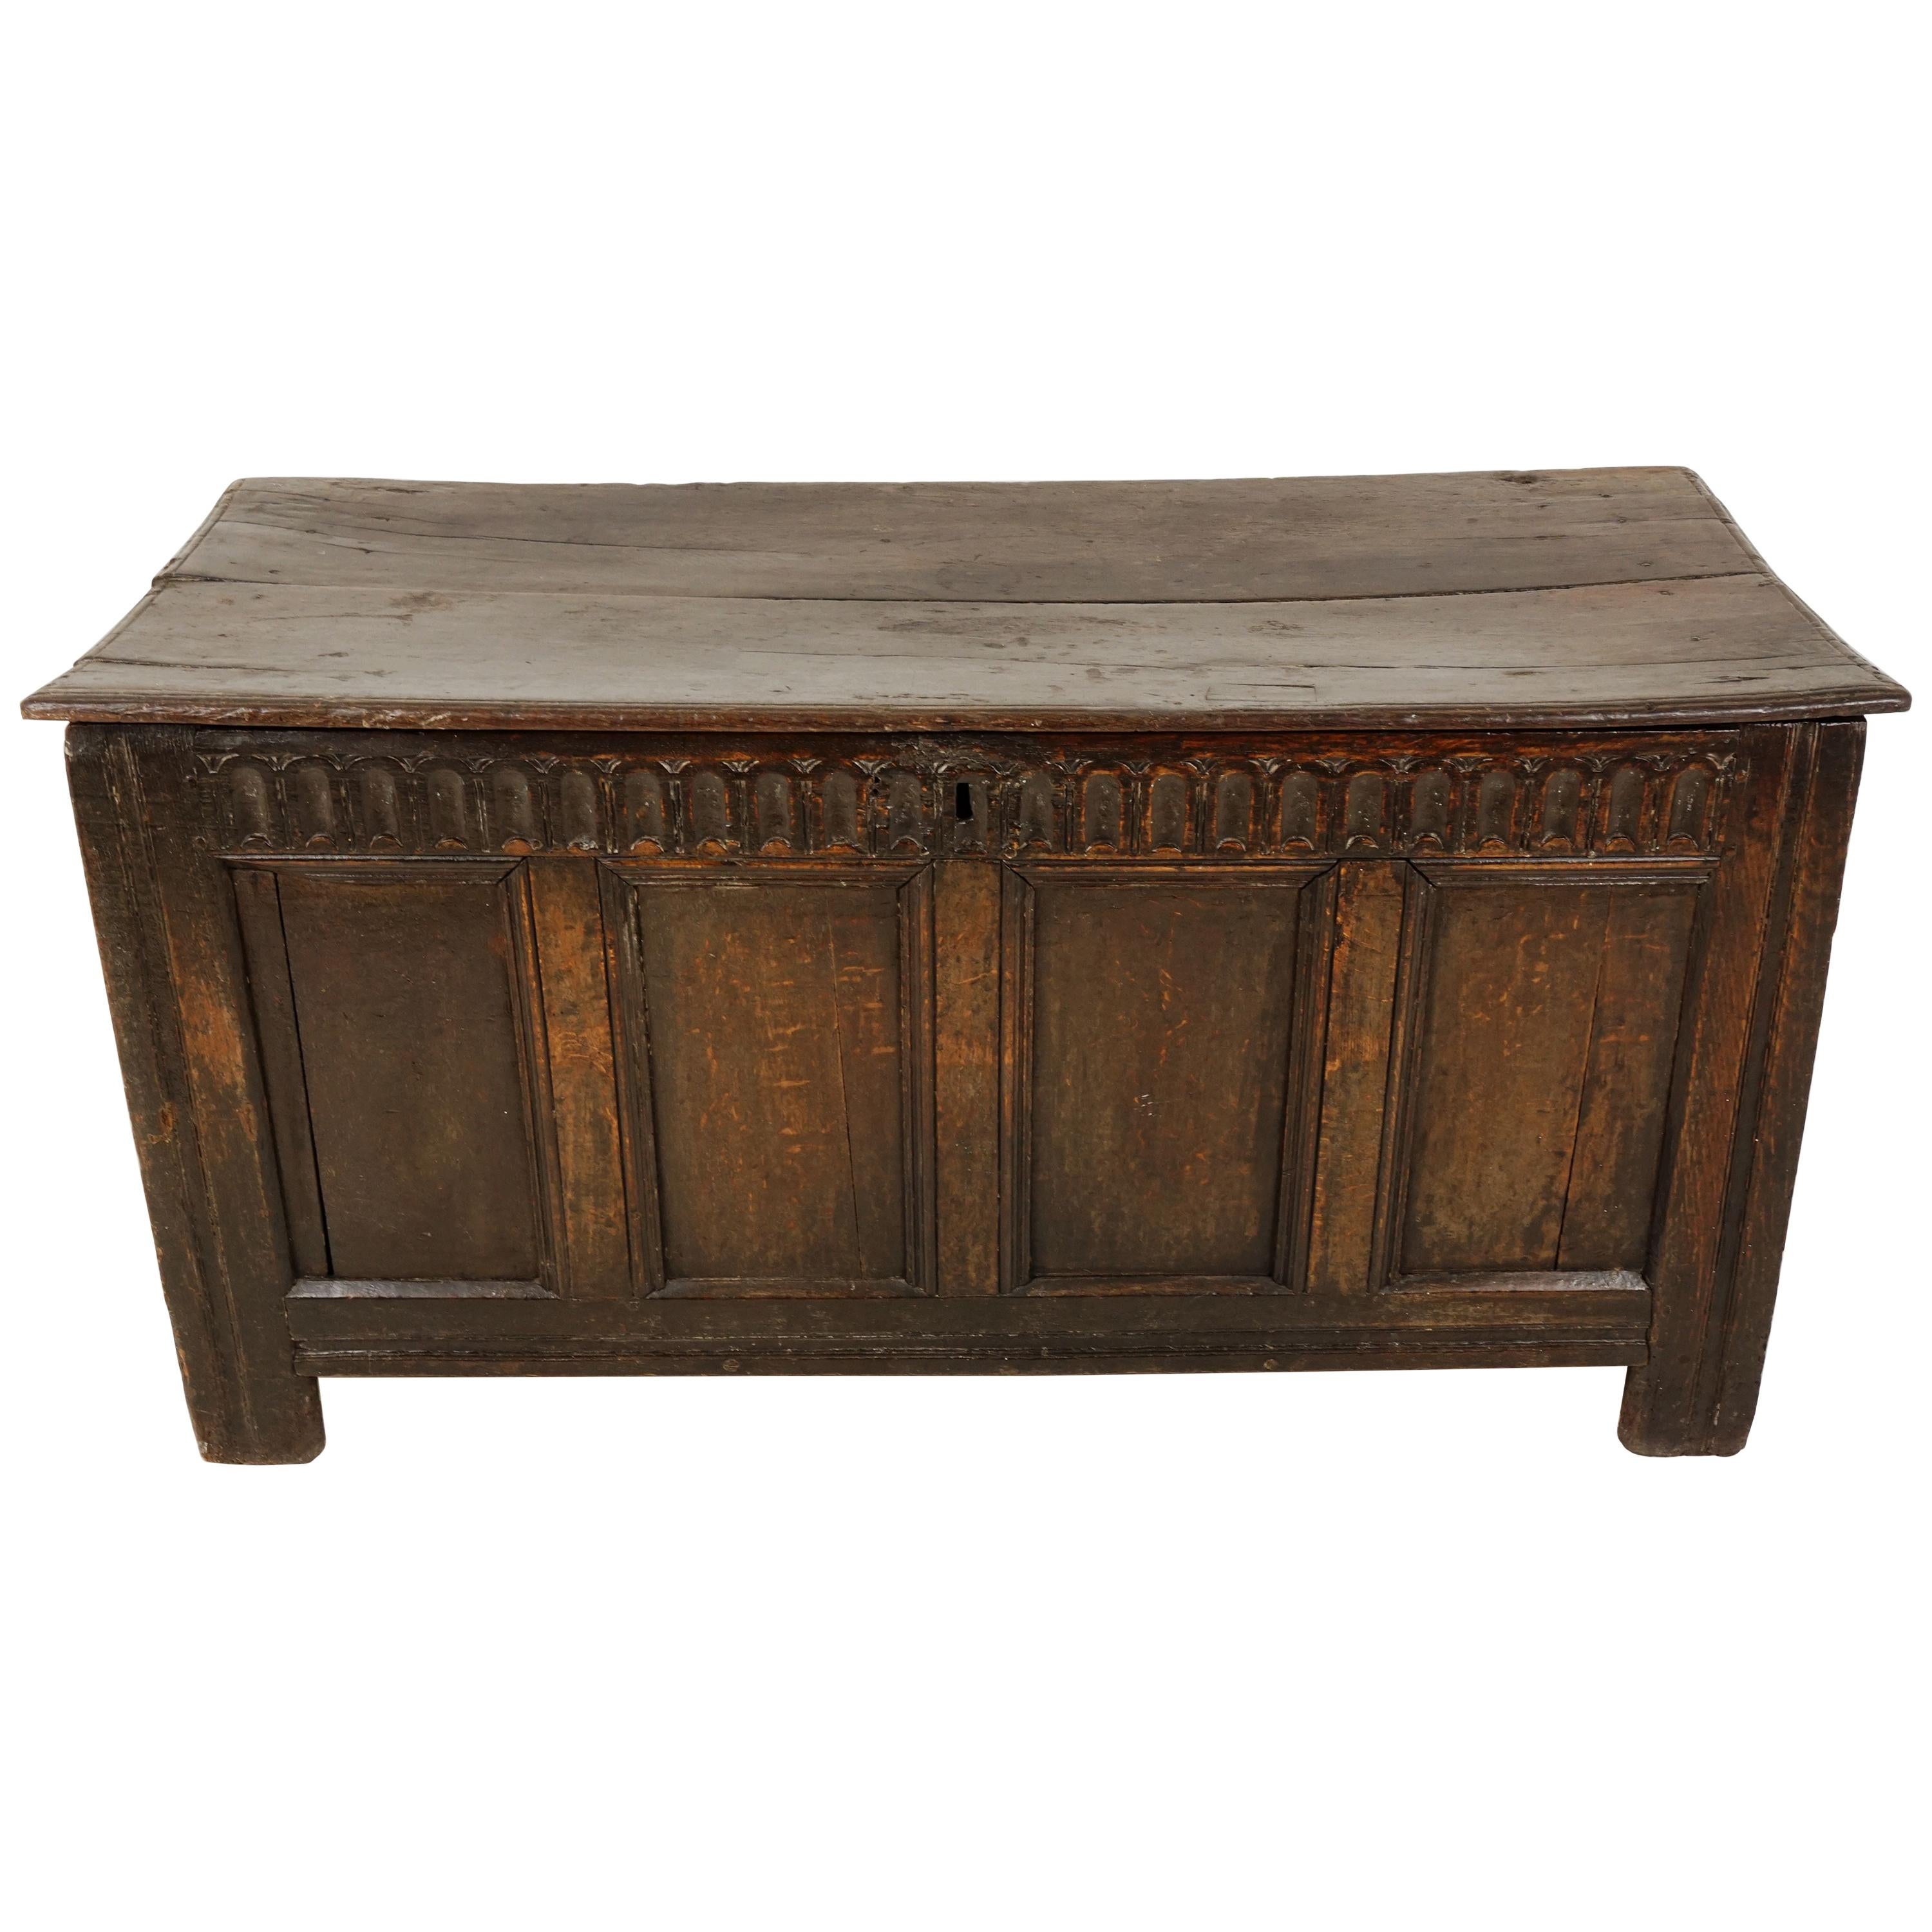 Antique Carved Oak Plank Coffer, 18th Century, Blanket Box, Trunk, 1770s